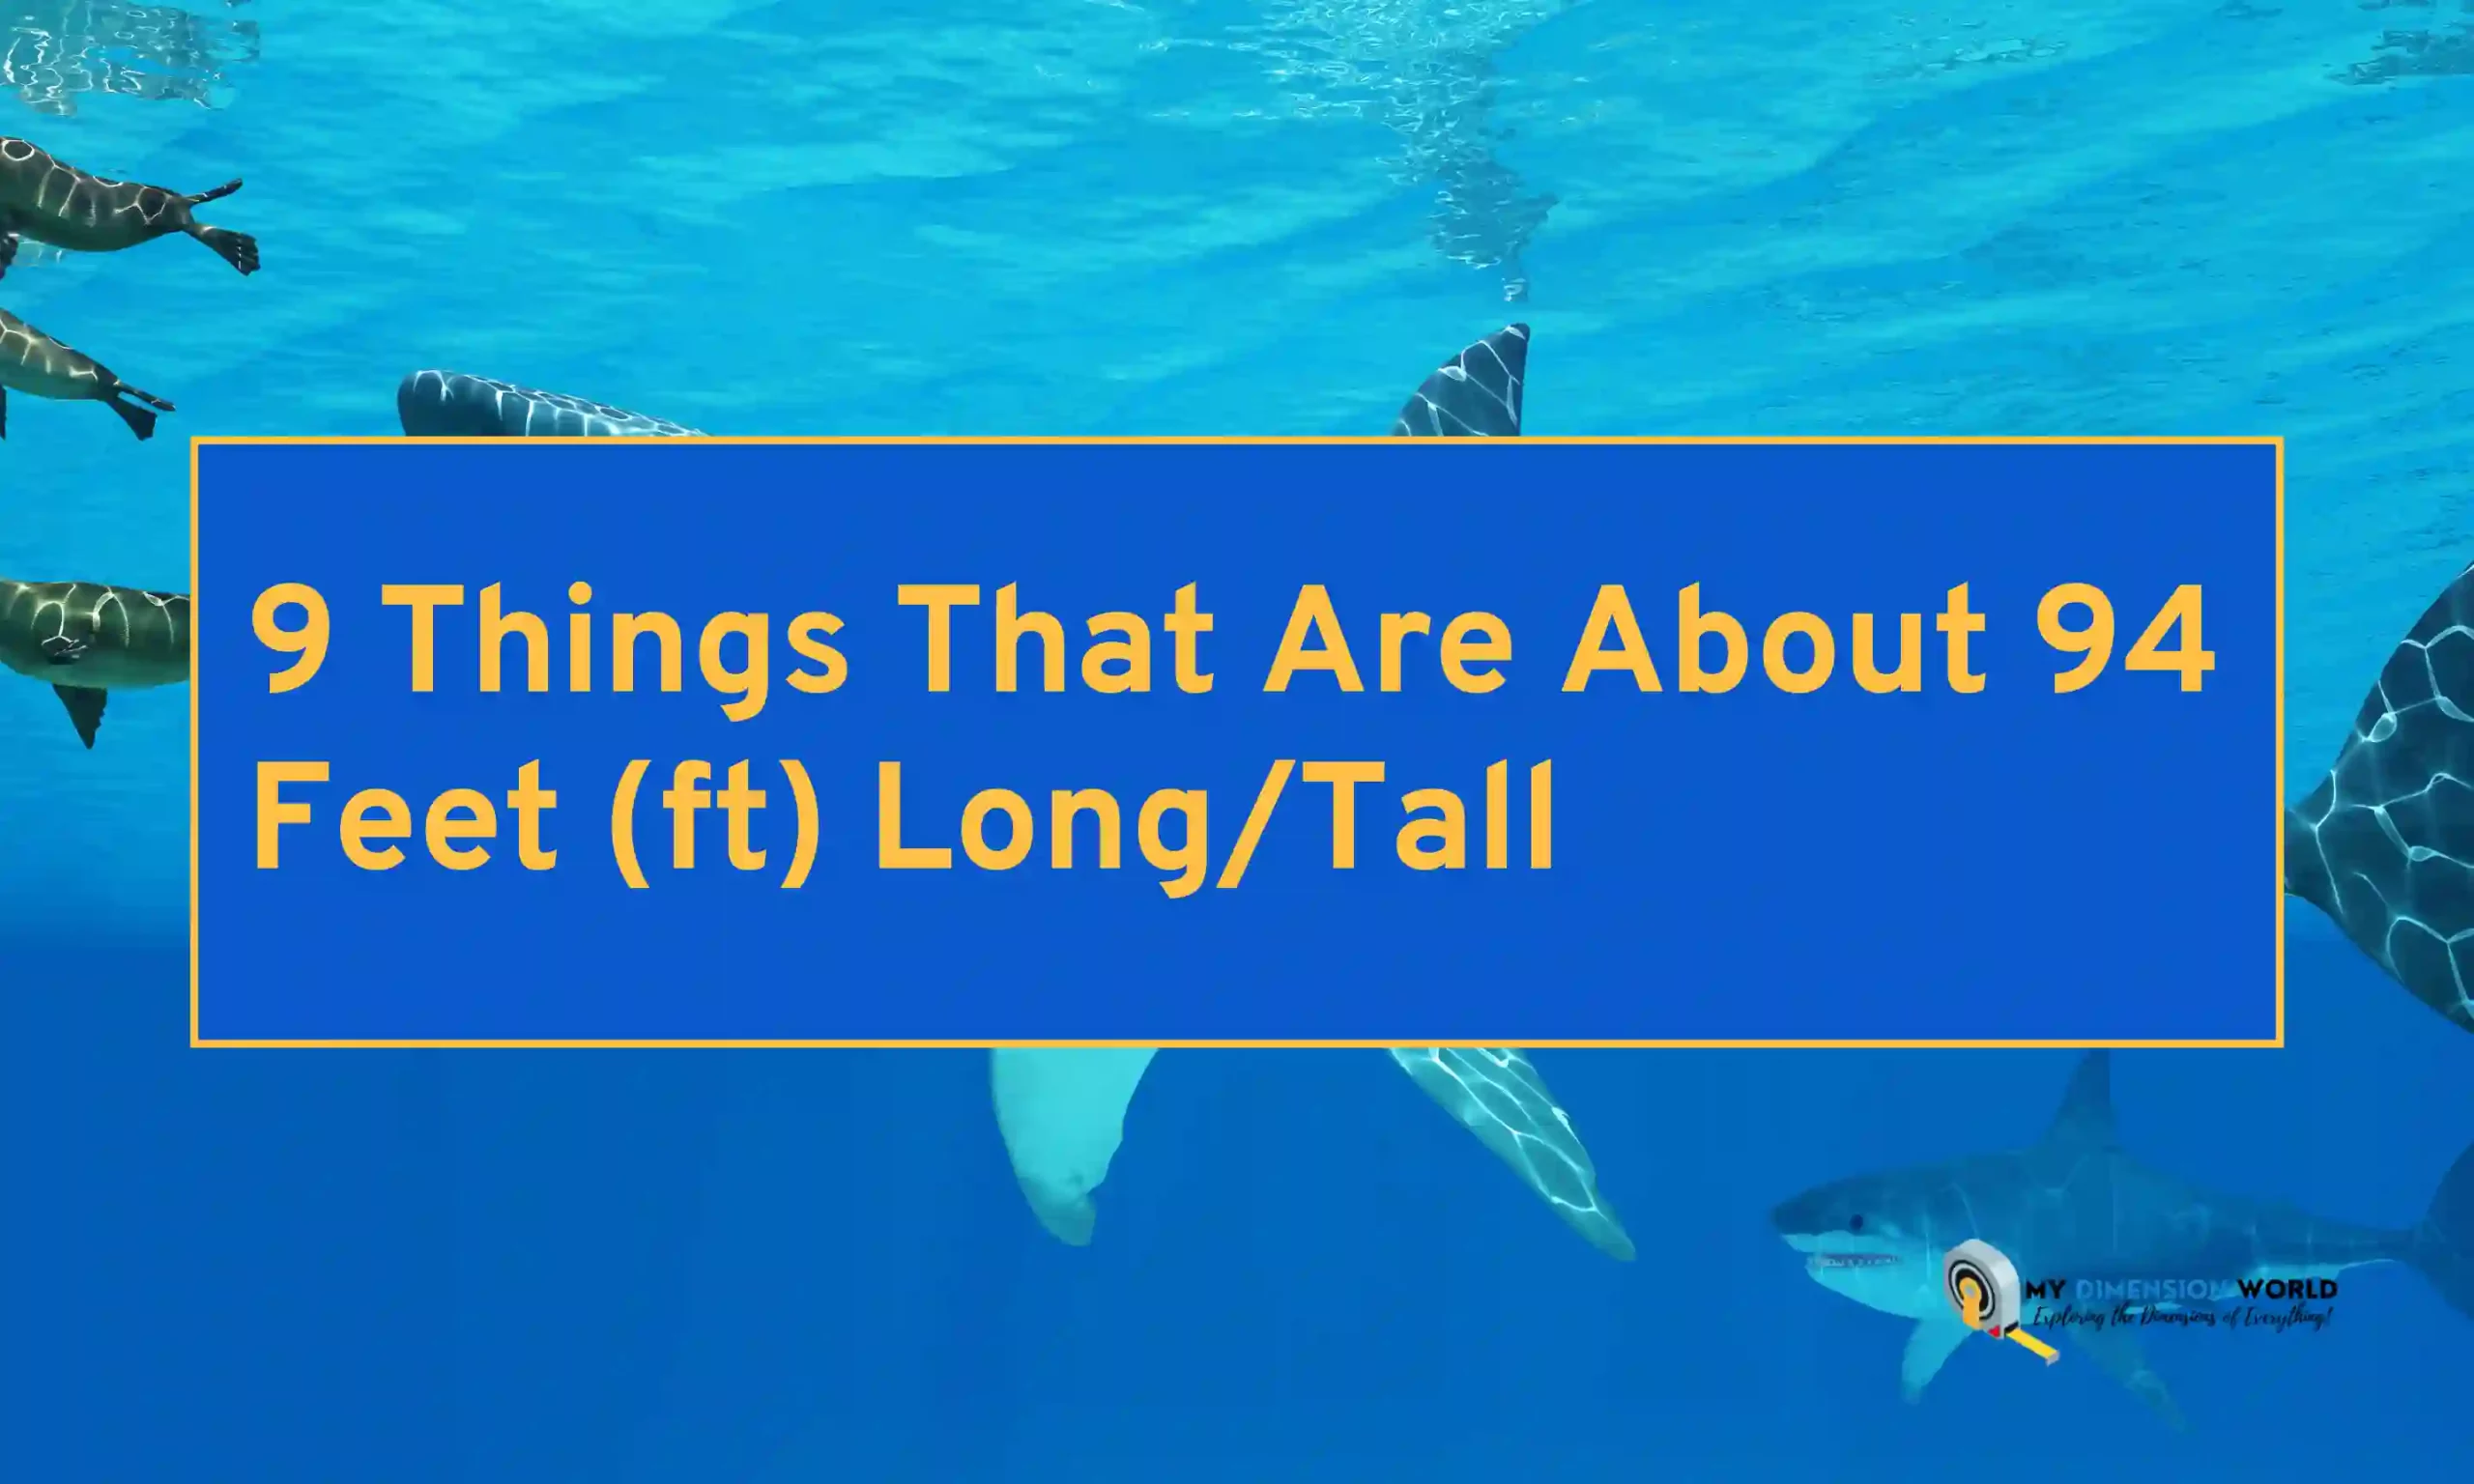 9 Things That Are About 94 Feet (ft) LongTall